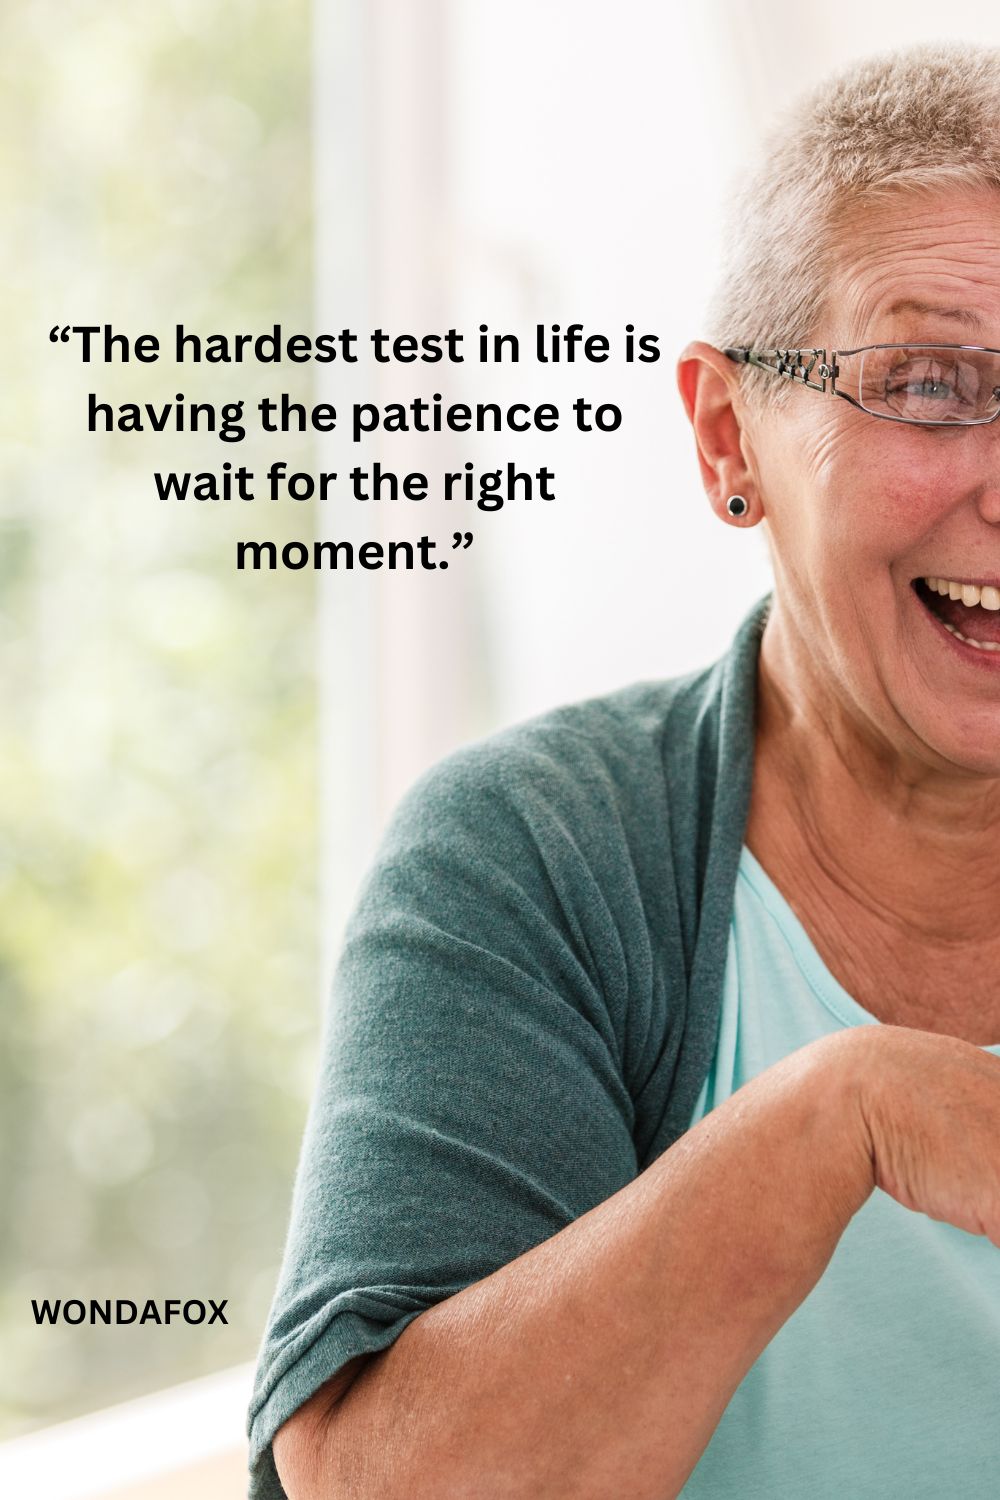 “The hardest test in life is having the patience to wait for the right moment.”